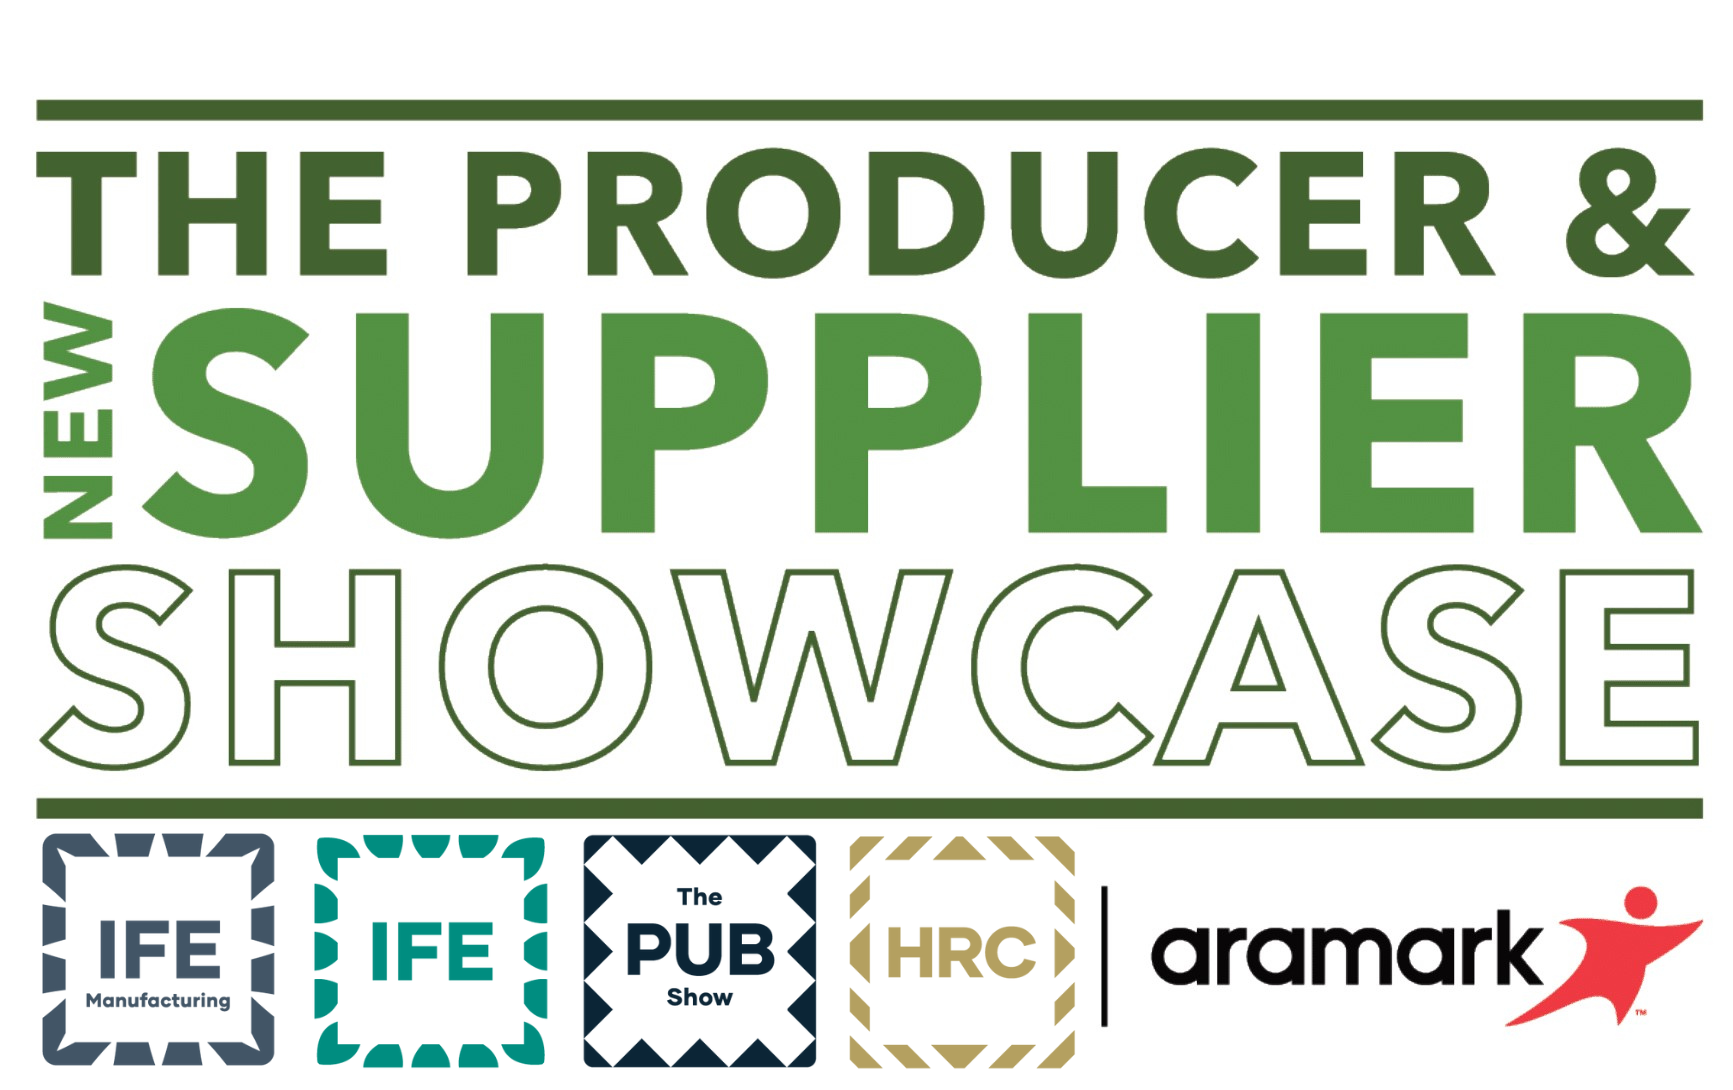 The Producer & Supplier Showcase